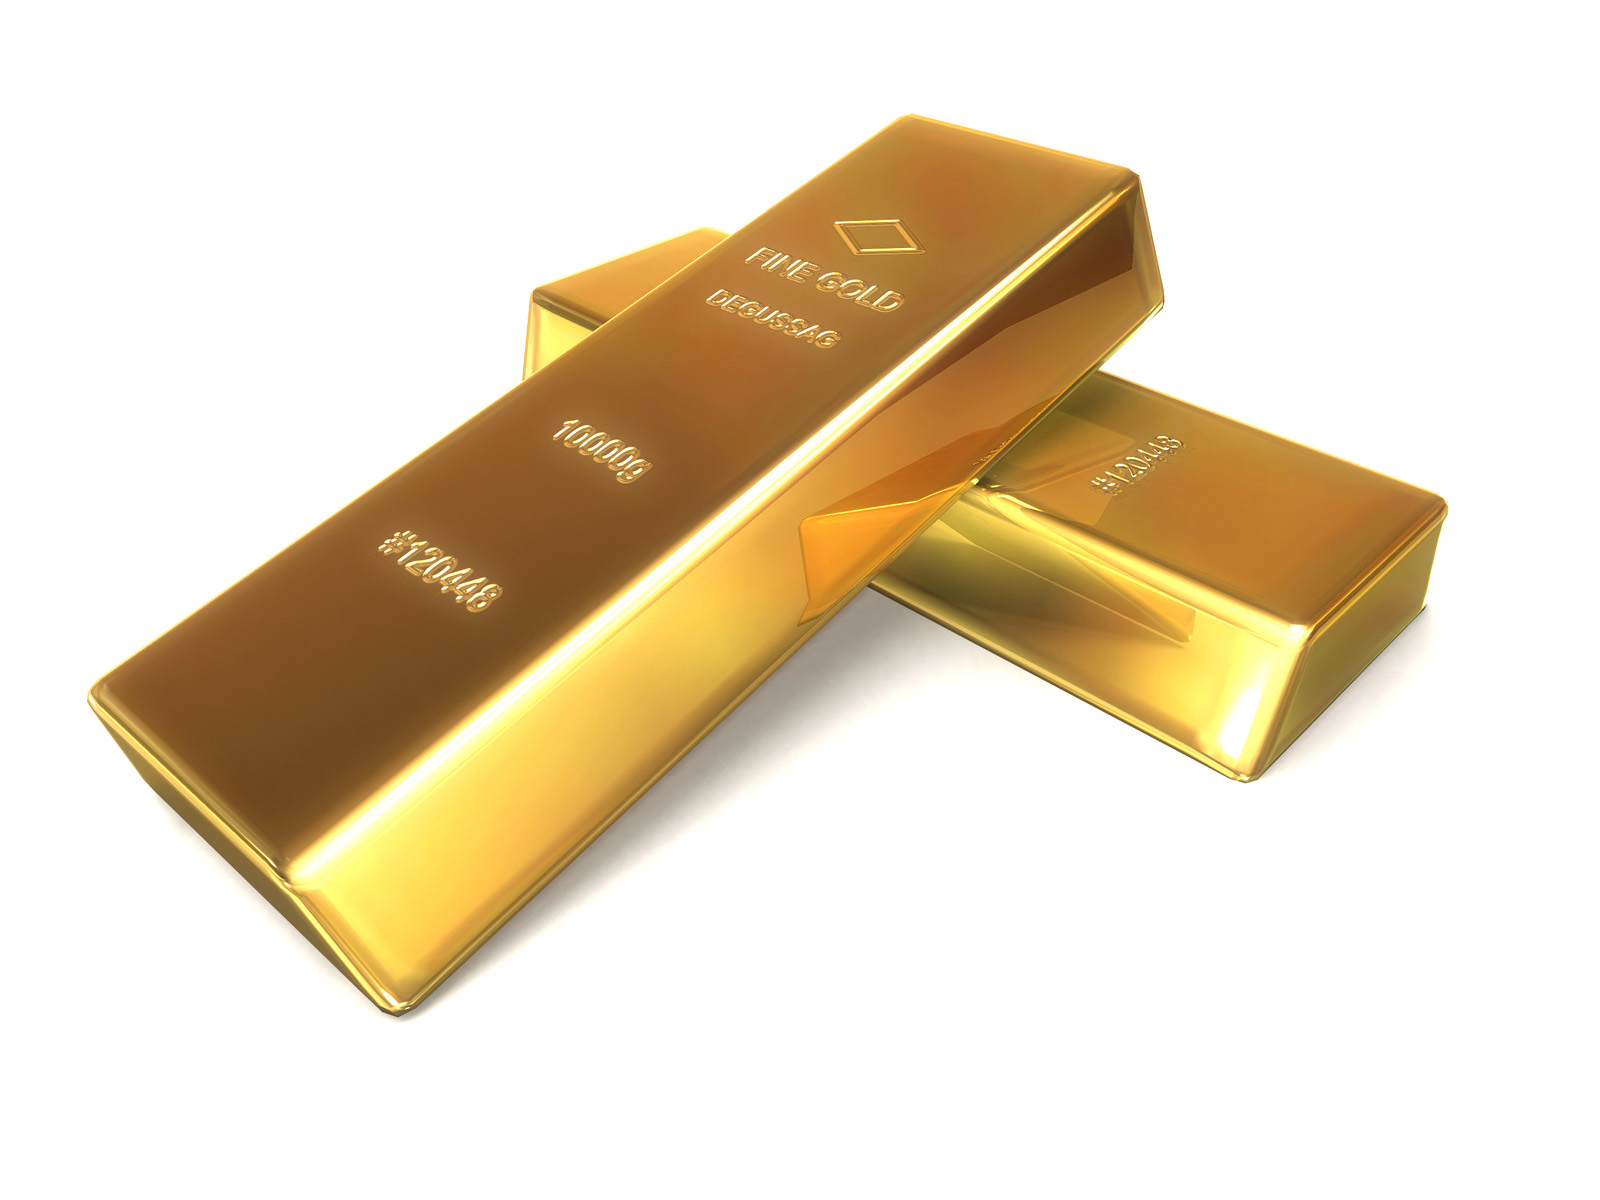 Why refer to gold as 'butter'? Gold ingots do not look, nor act like ...